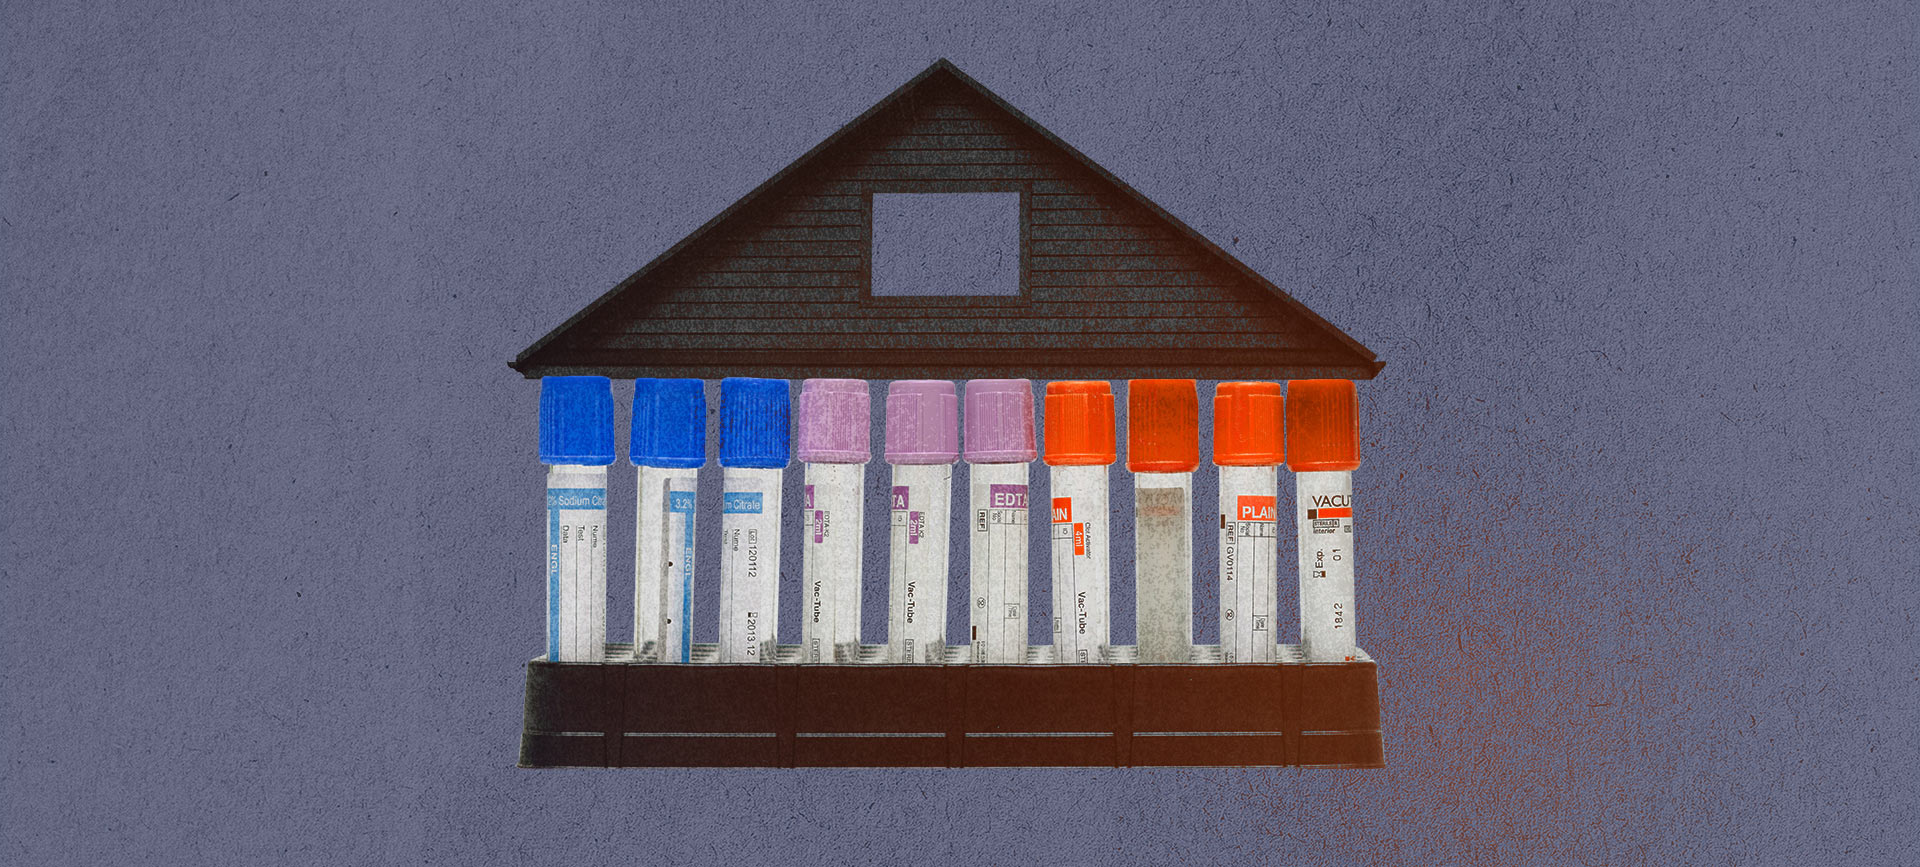 A row of test tubes form the walls of a house.